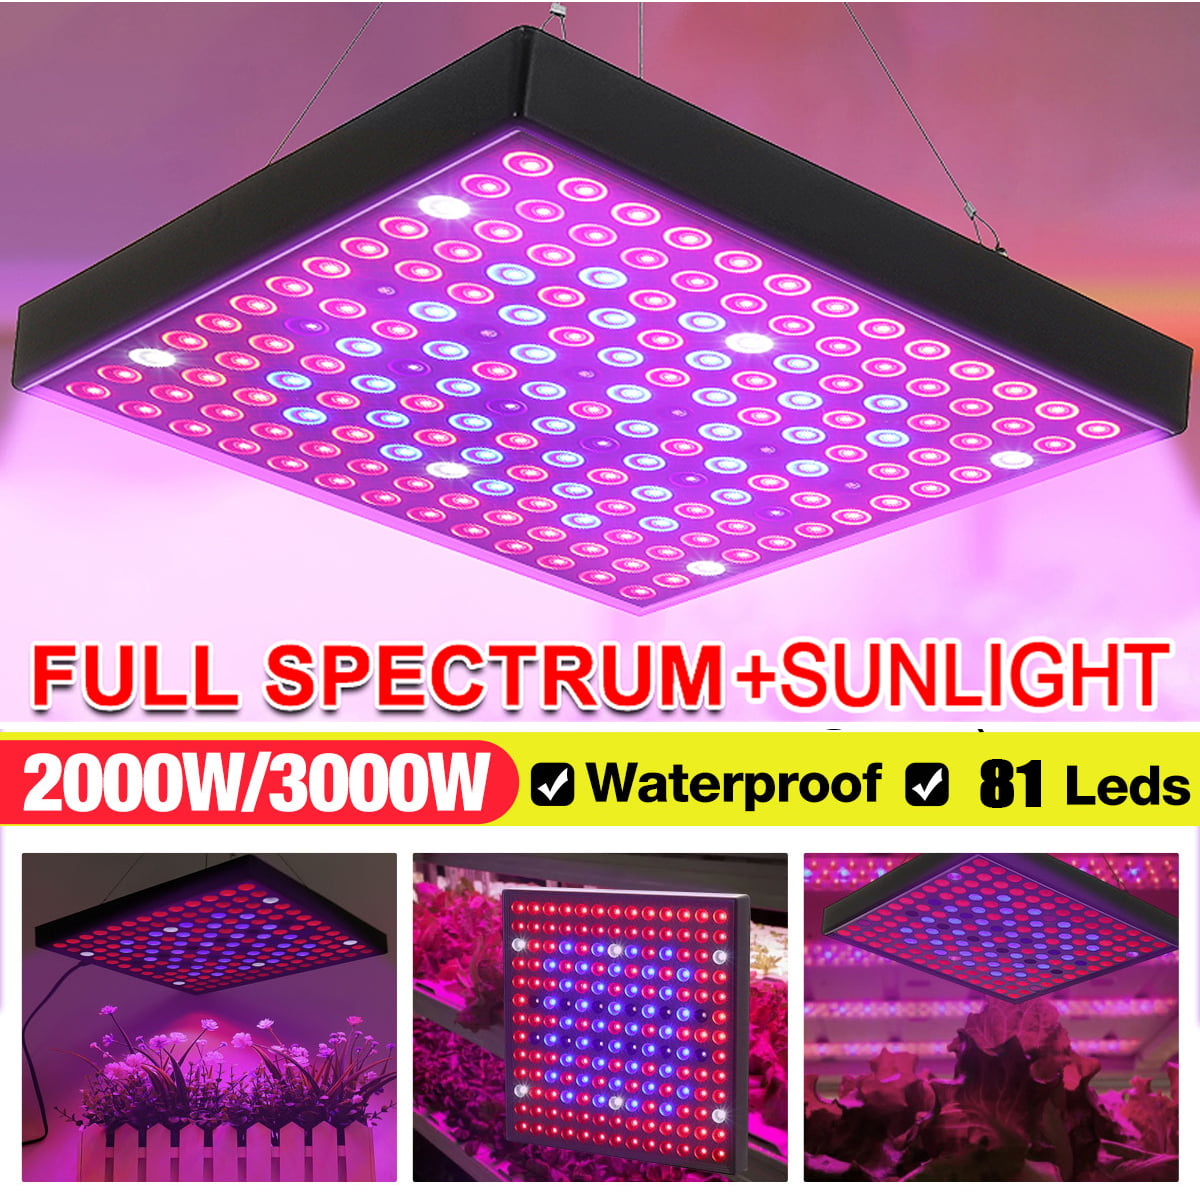 225LED 5000W Grow Light Growing Lamp Full Spectrum for Indoor Plant Hydroponic 